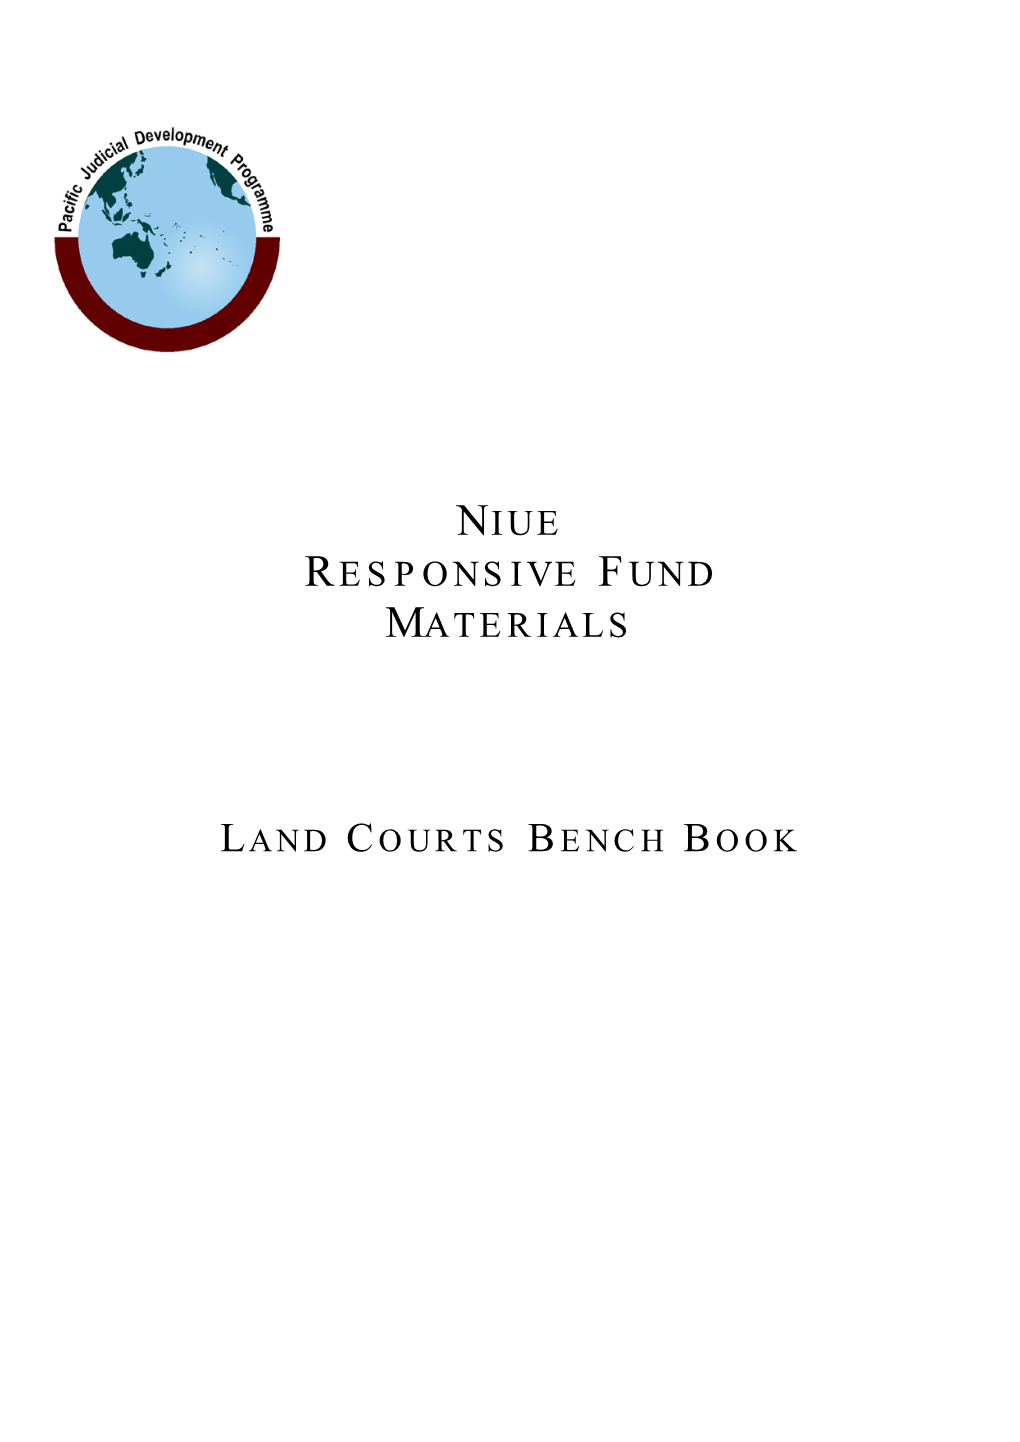 The Land Court of Niue Bench Book